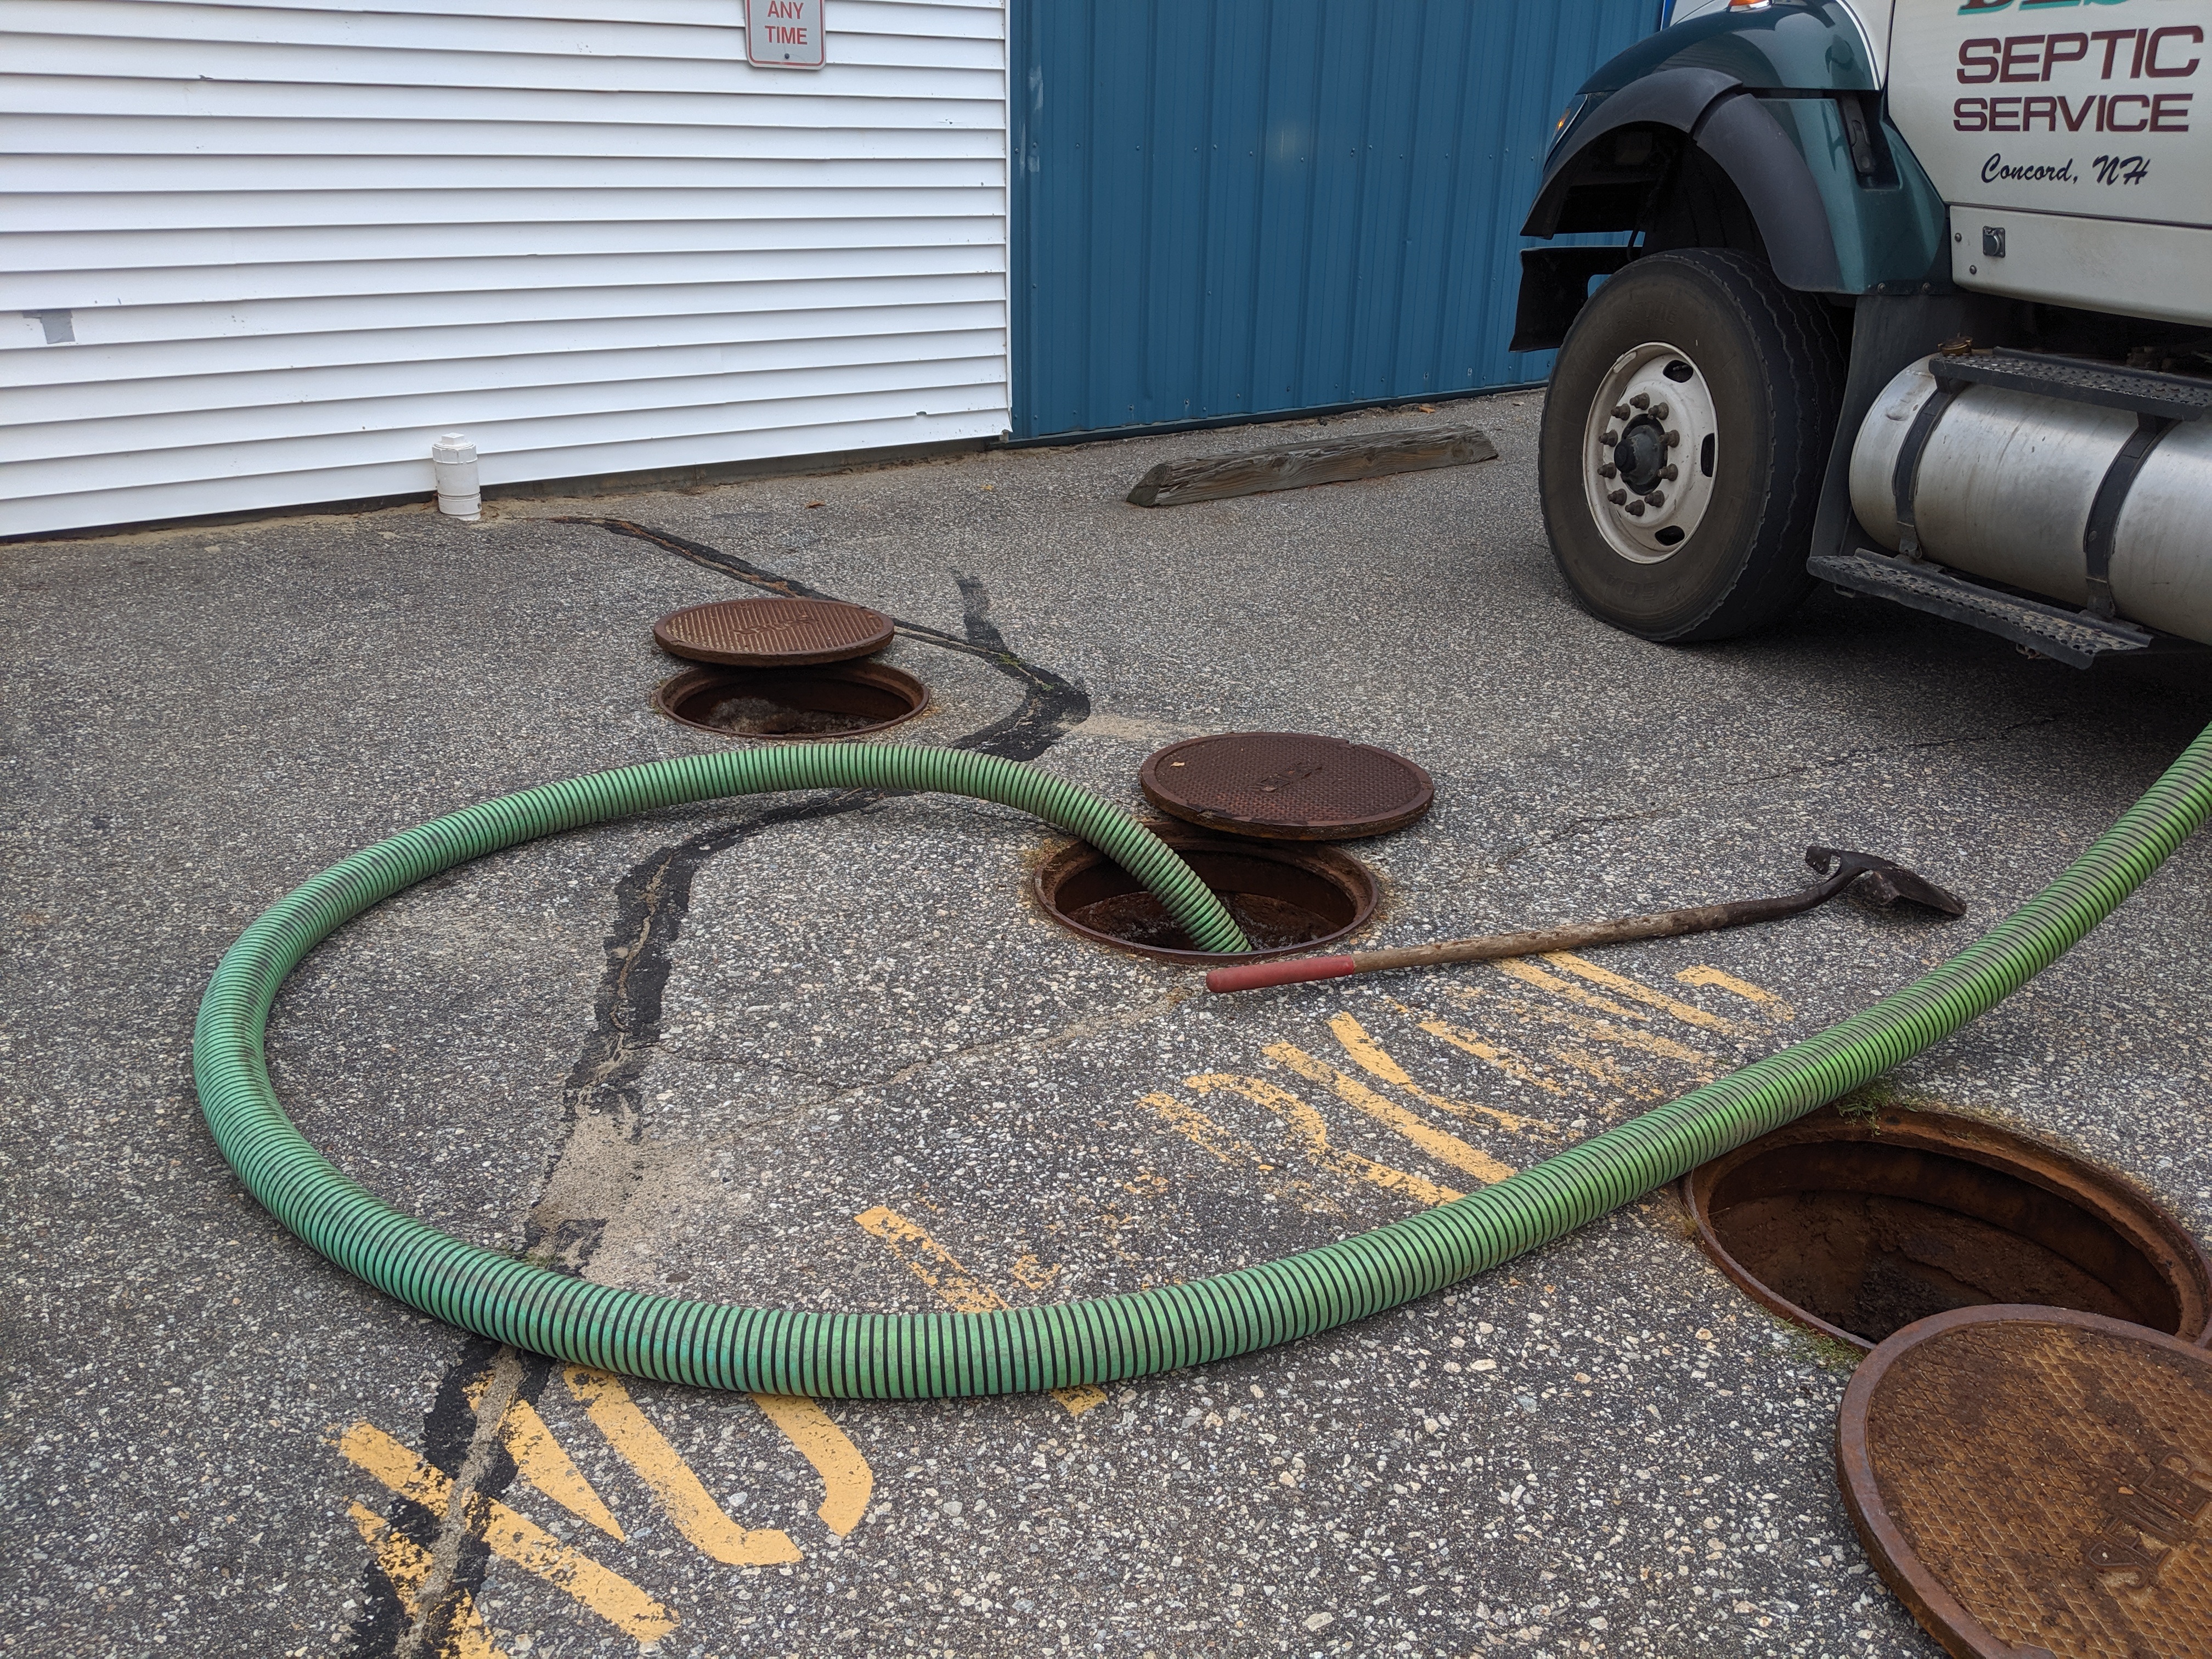 asphalt with green hose dumping the waste from a septic tank into a manhole leading to wastewater facility 